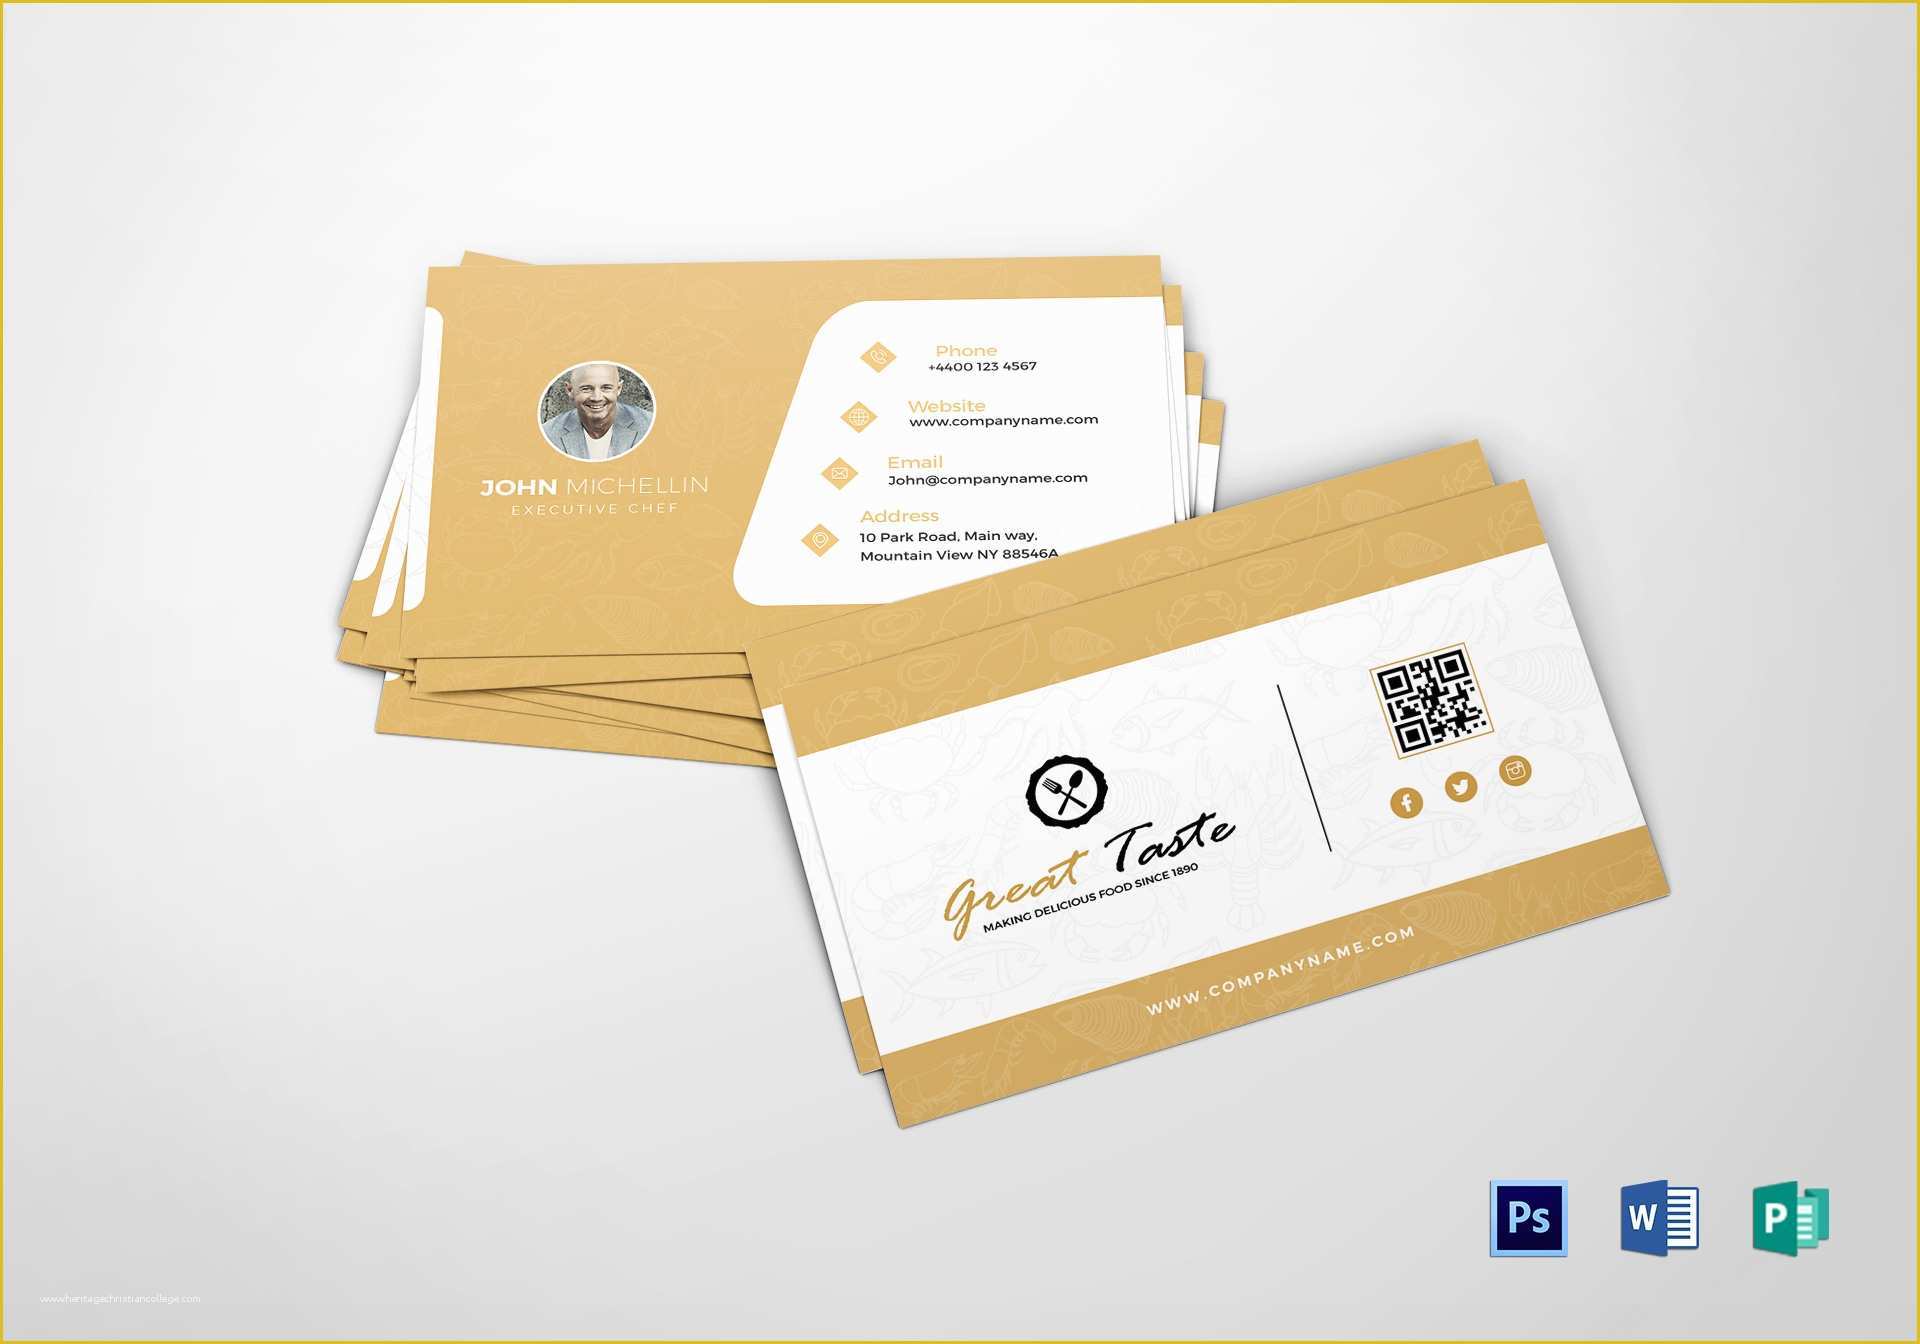 Restaurant Business Cards Templates Free Of Restaurant Chef Business Card Design Template In Psd Word